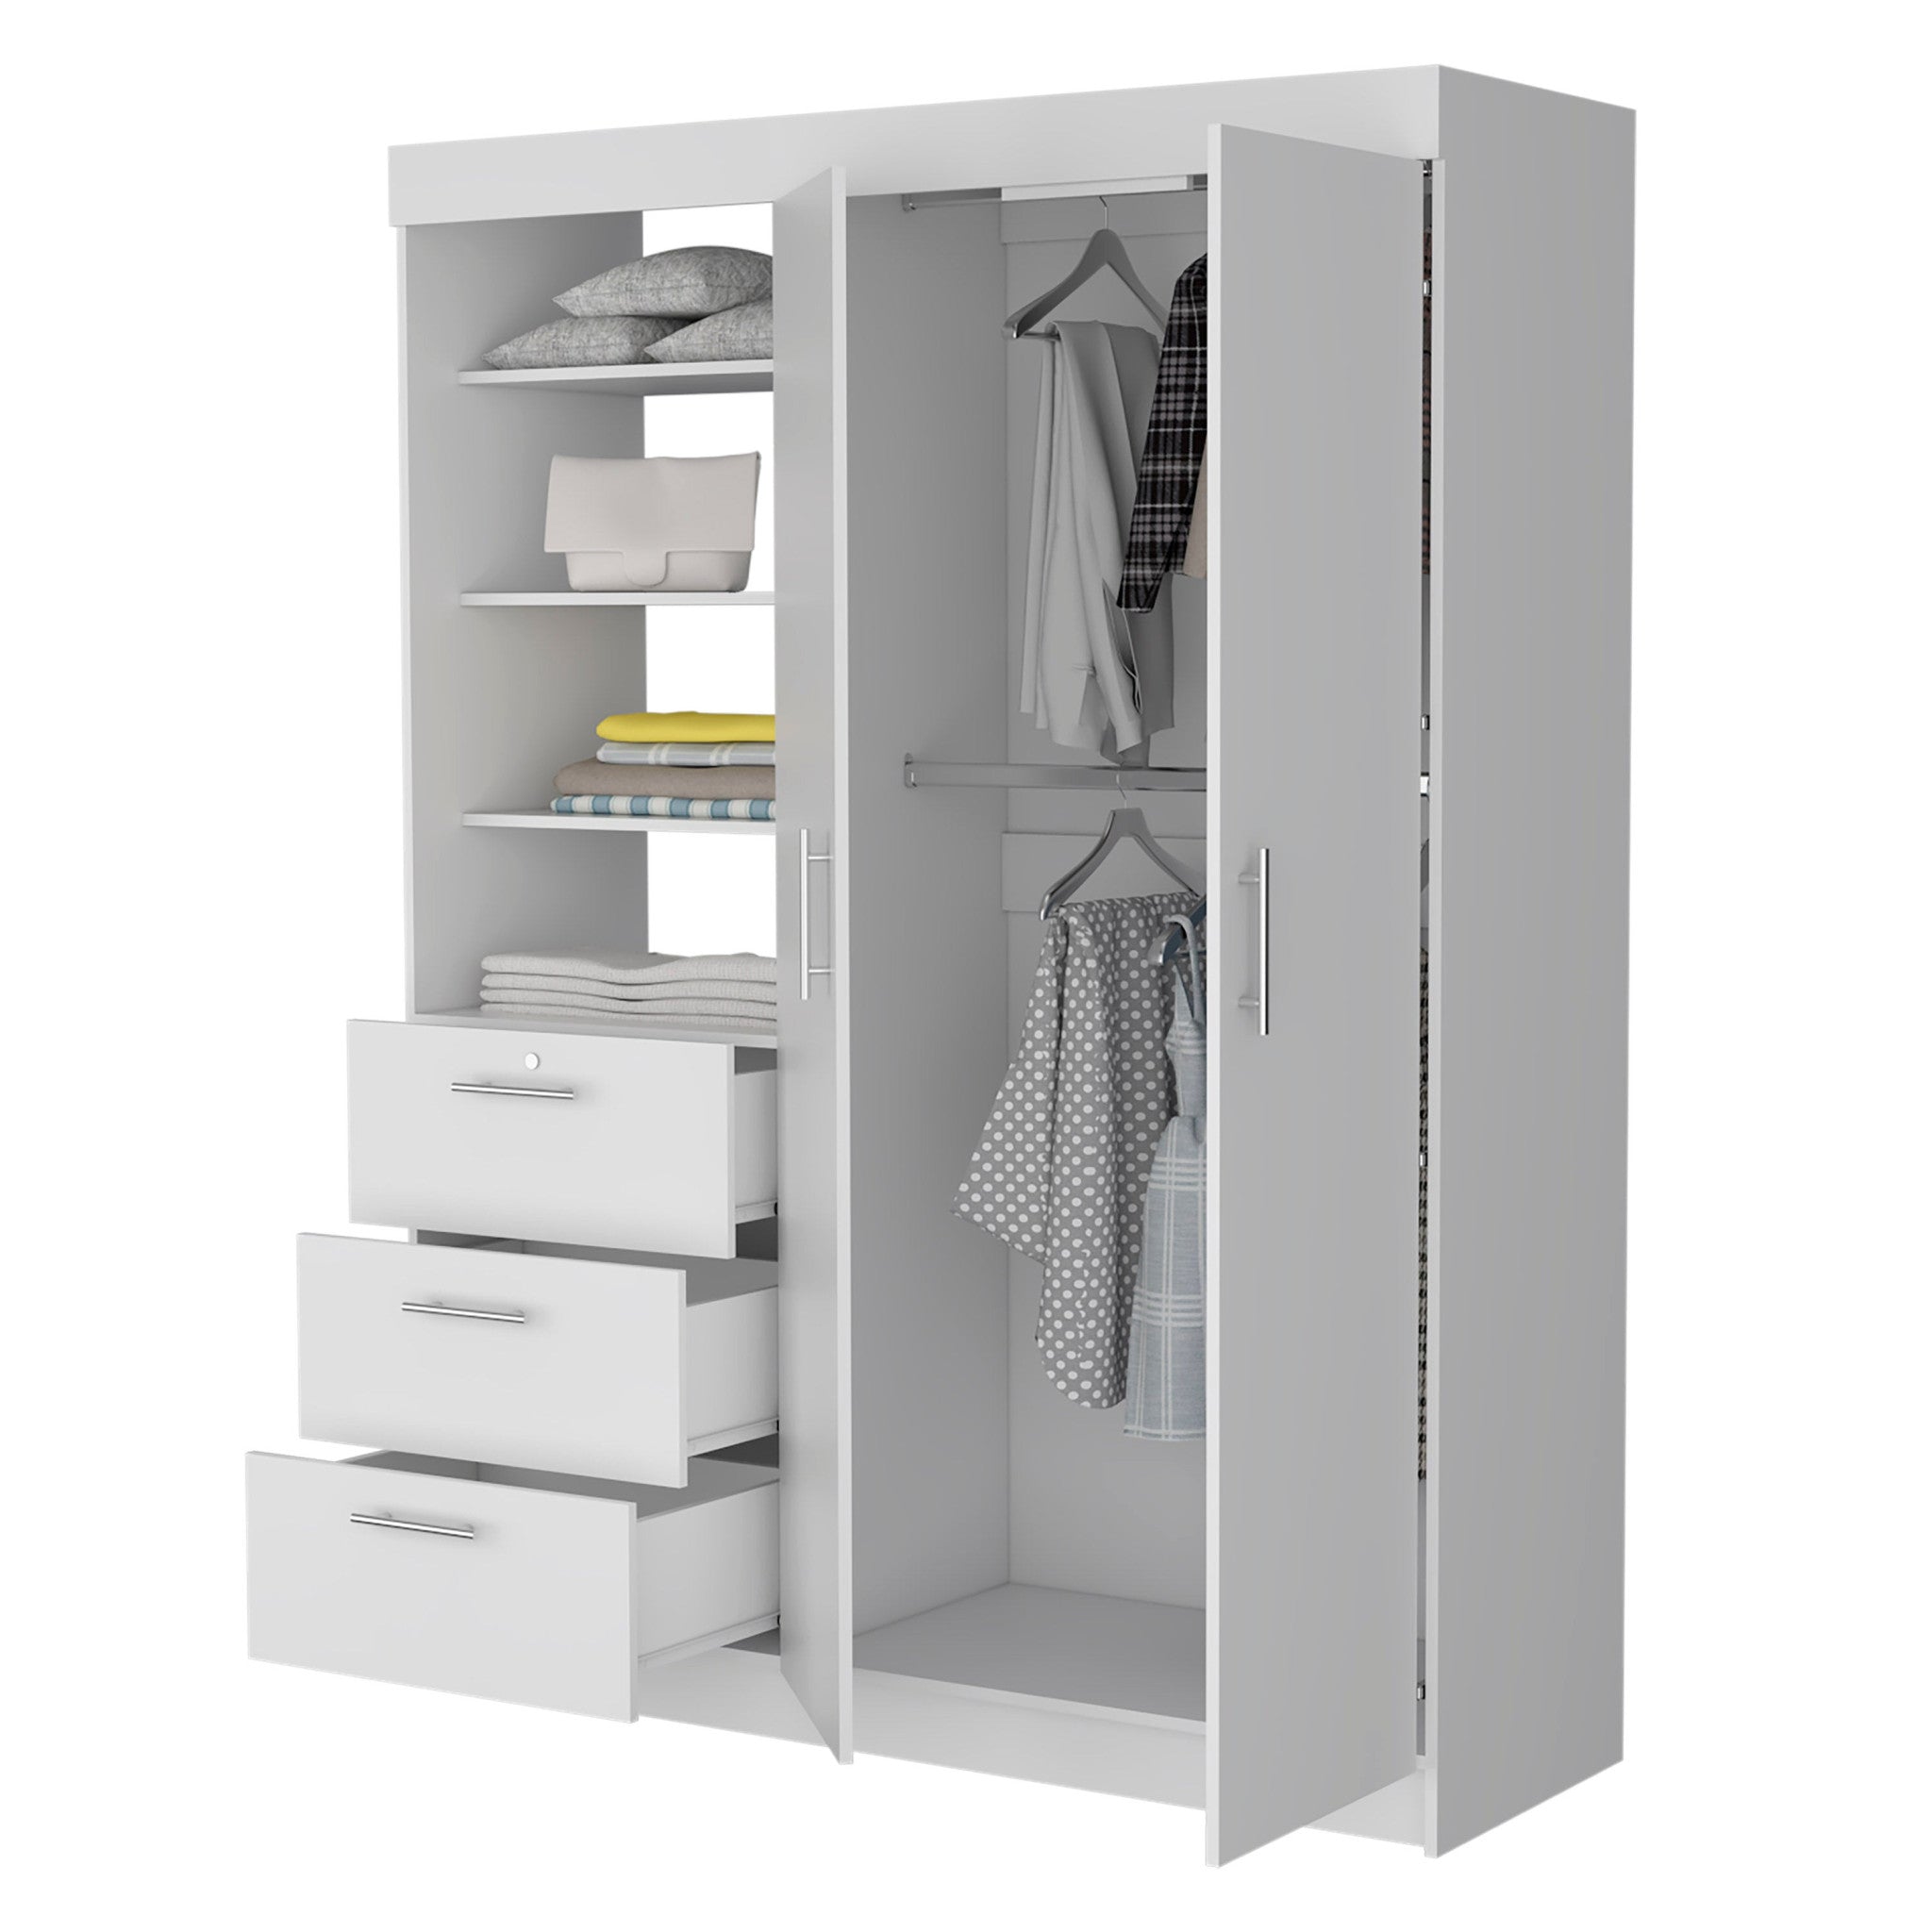 59" White Accent Cabinet Soft Close With Three Shelves And Three Drawers